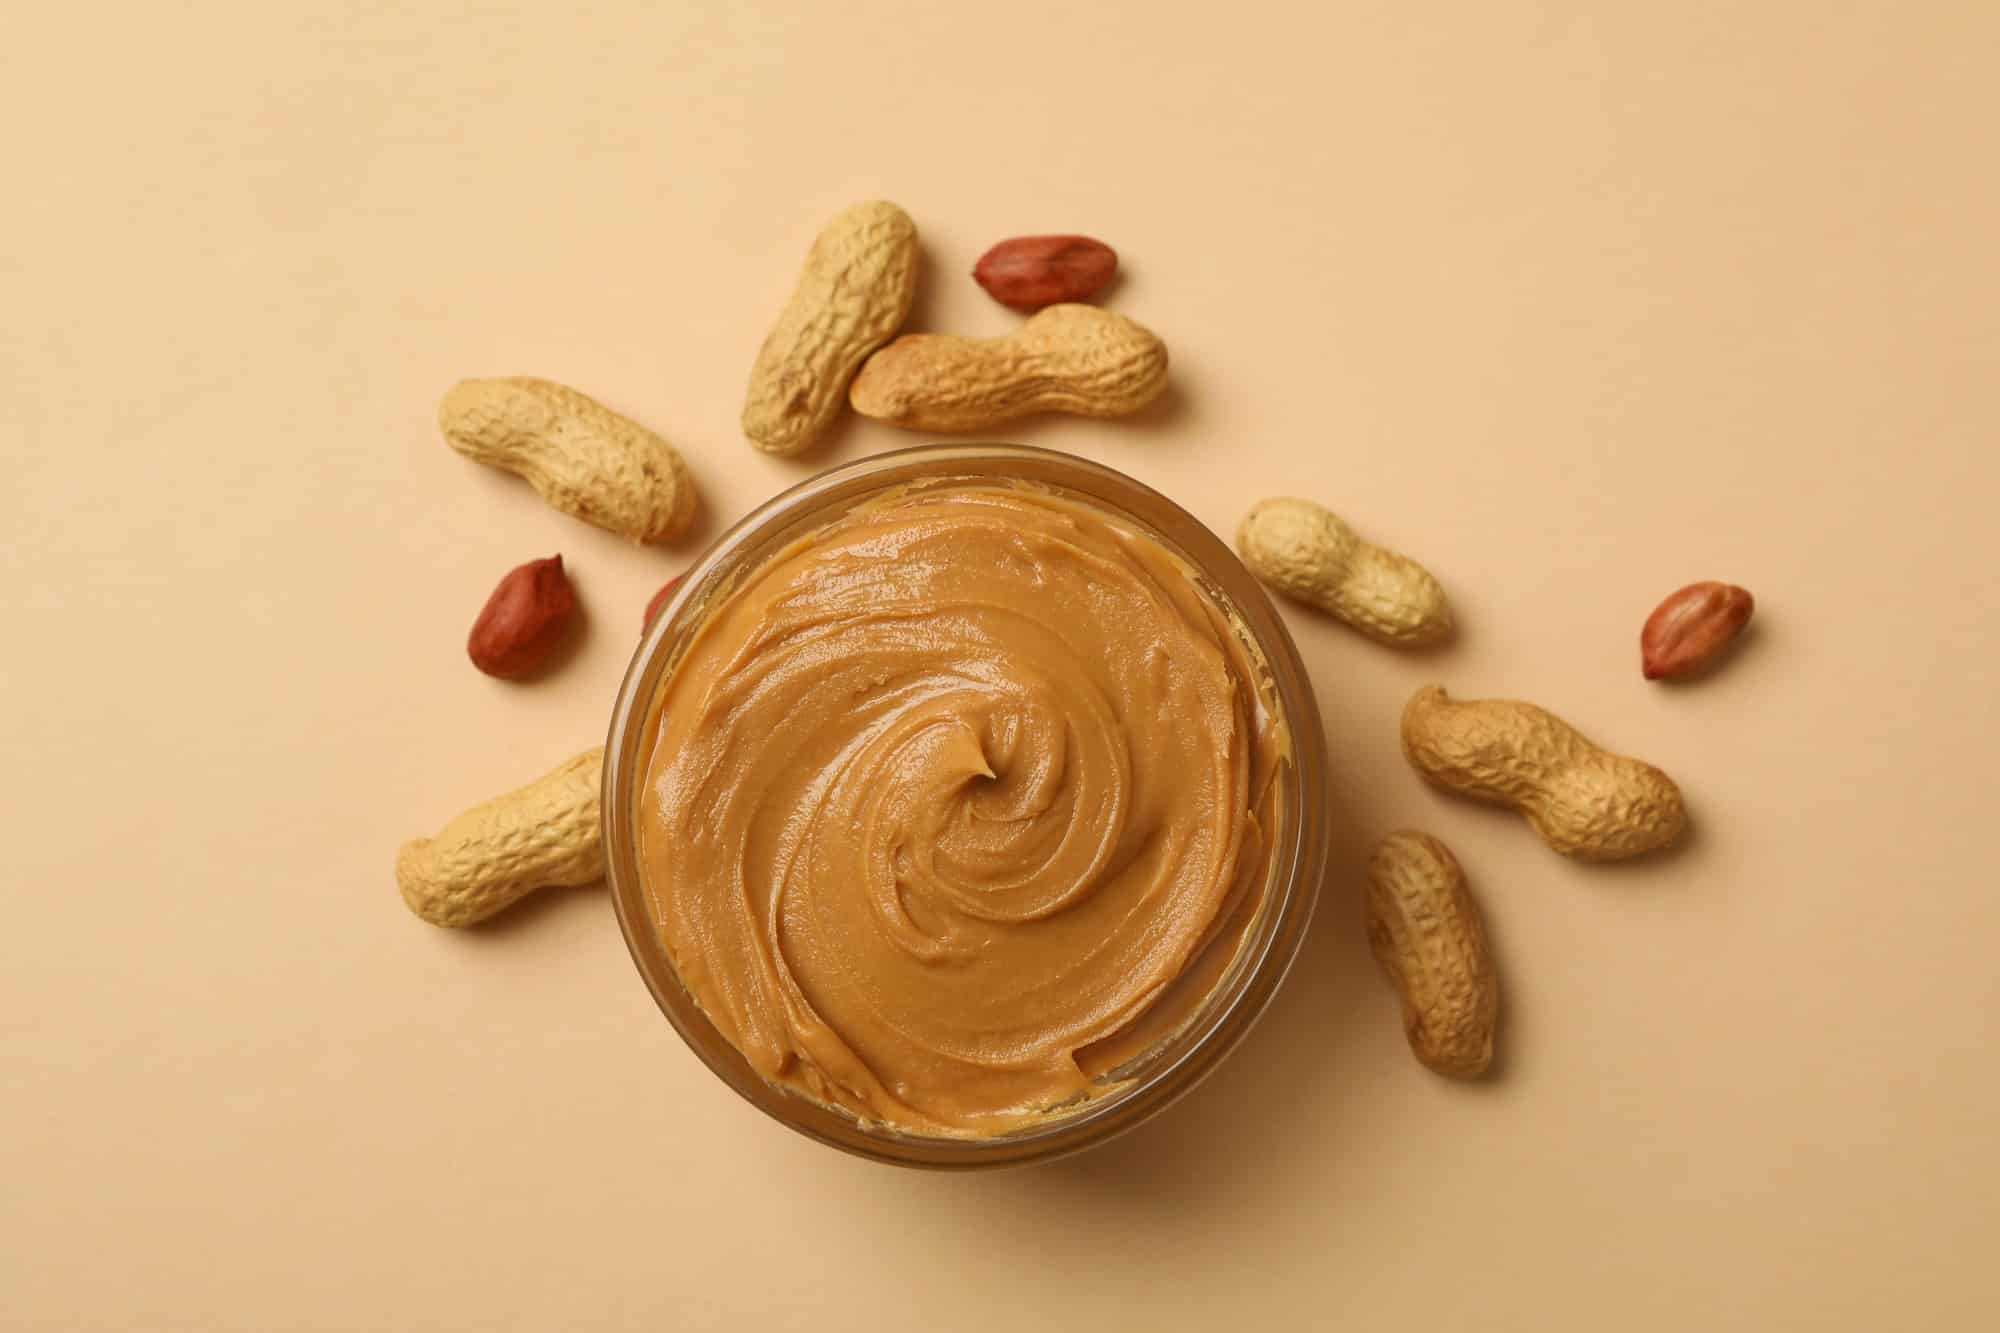 Peanut and bowl with peanut butter on beige background